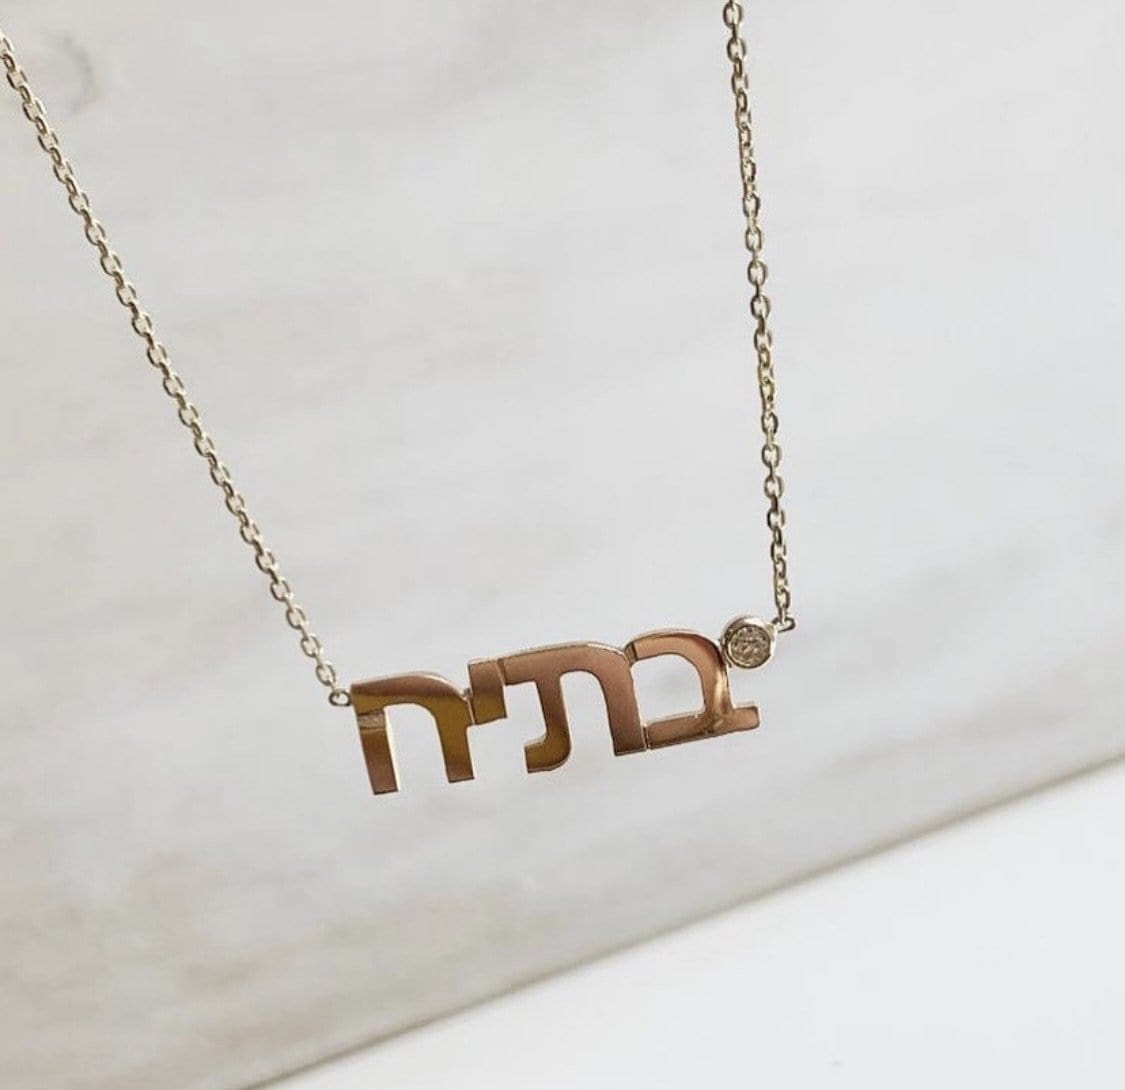 LeahJessicaJewelry Necklaces Hebrew Name Necklace with Diamond - Yellow, Rose or White Gold